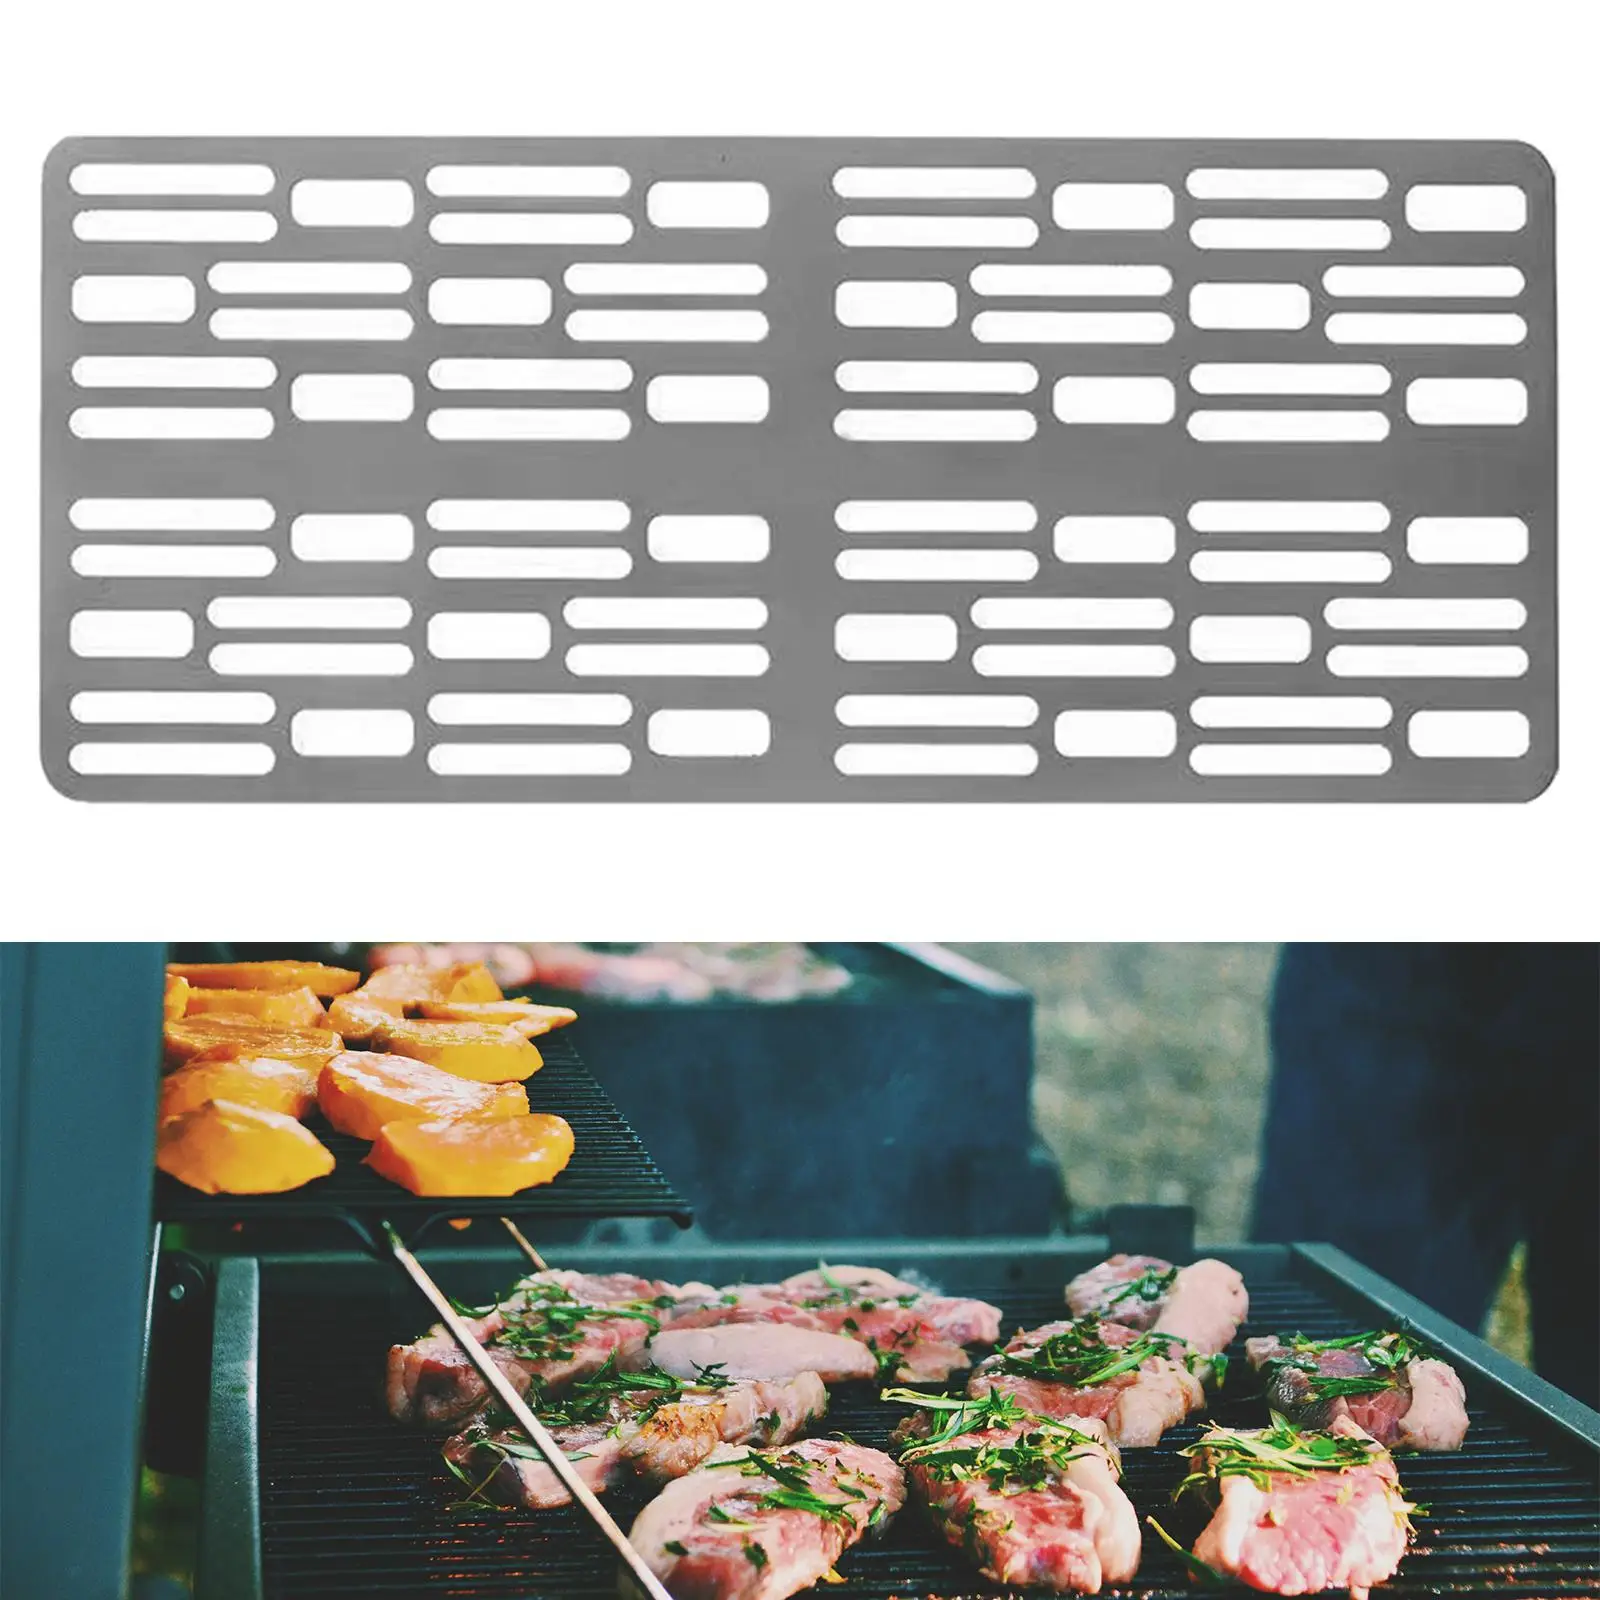 Grill with Bag Durable Stainless Steel Barbecue Grid Gas Grill for Beach/ BBQ/ Outdoor/ Camping/ Hiking